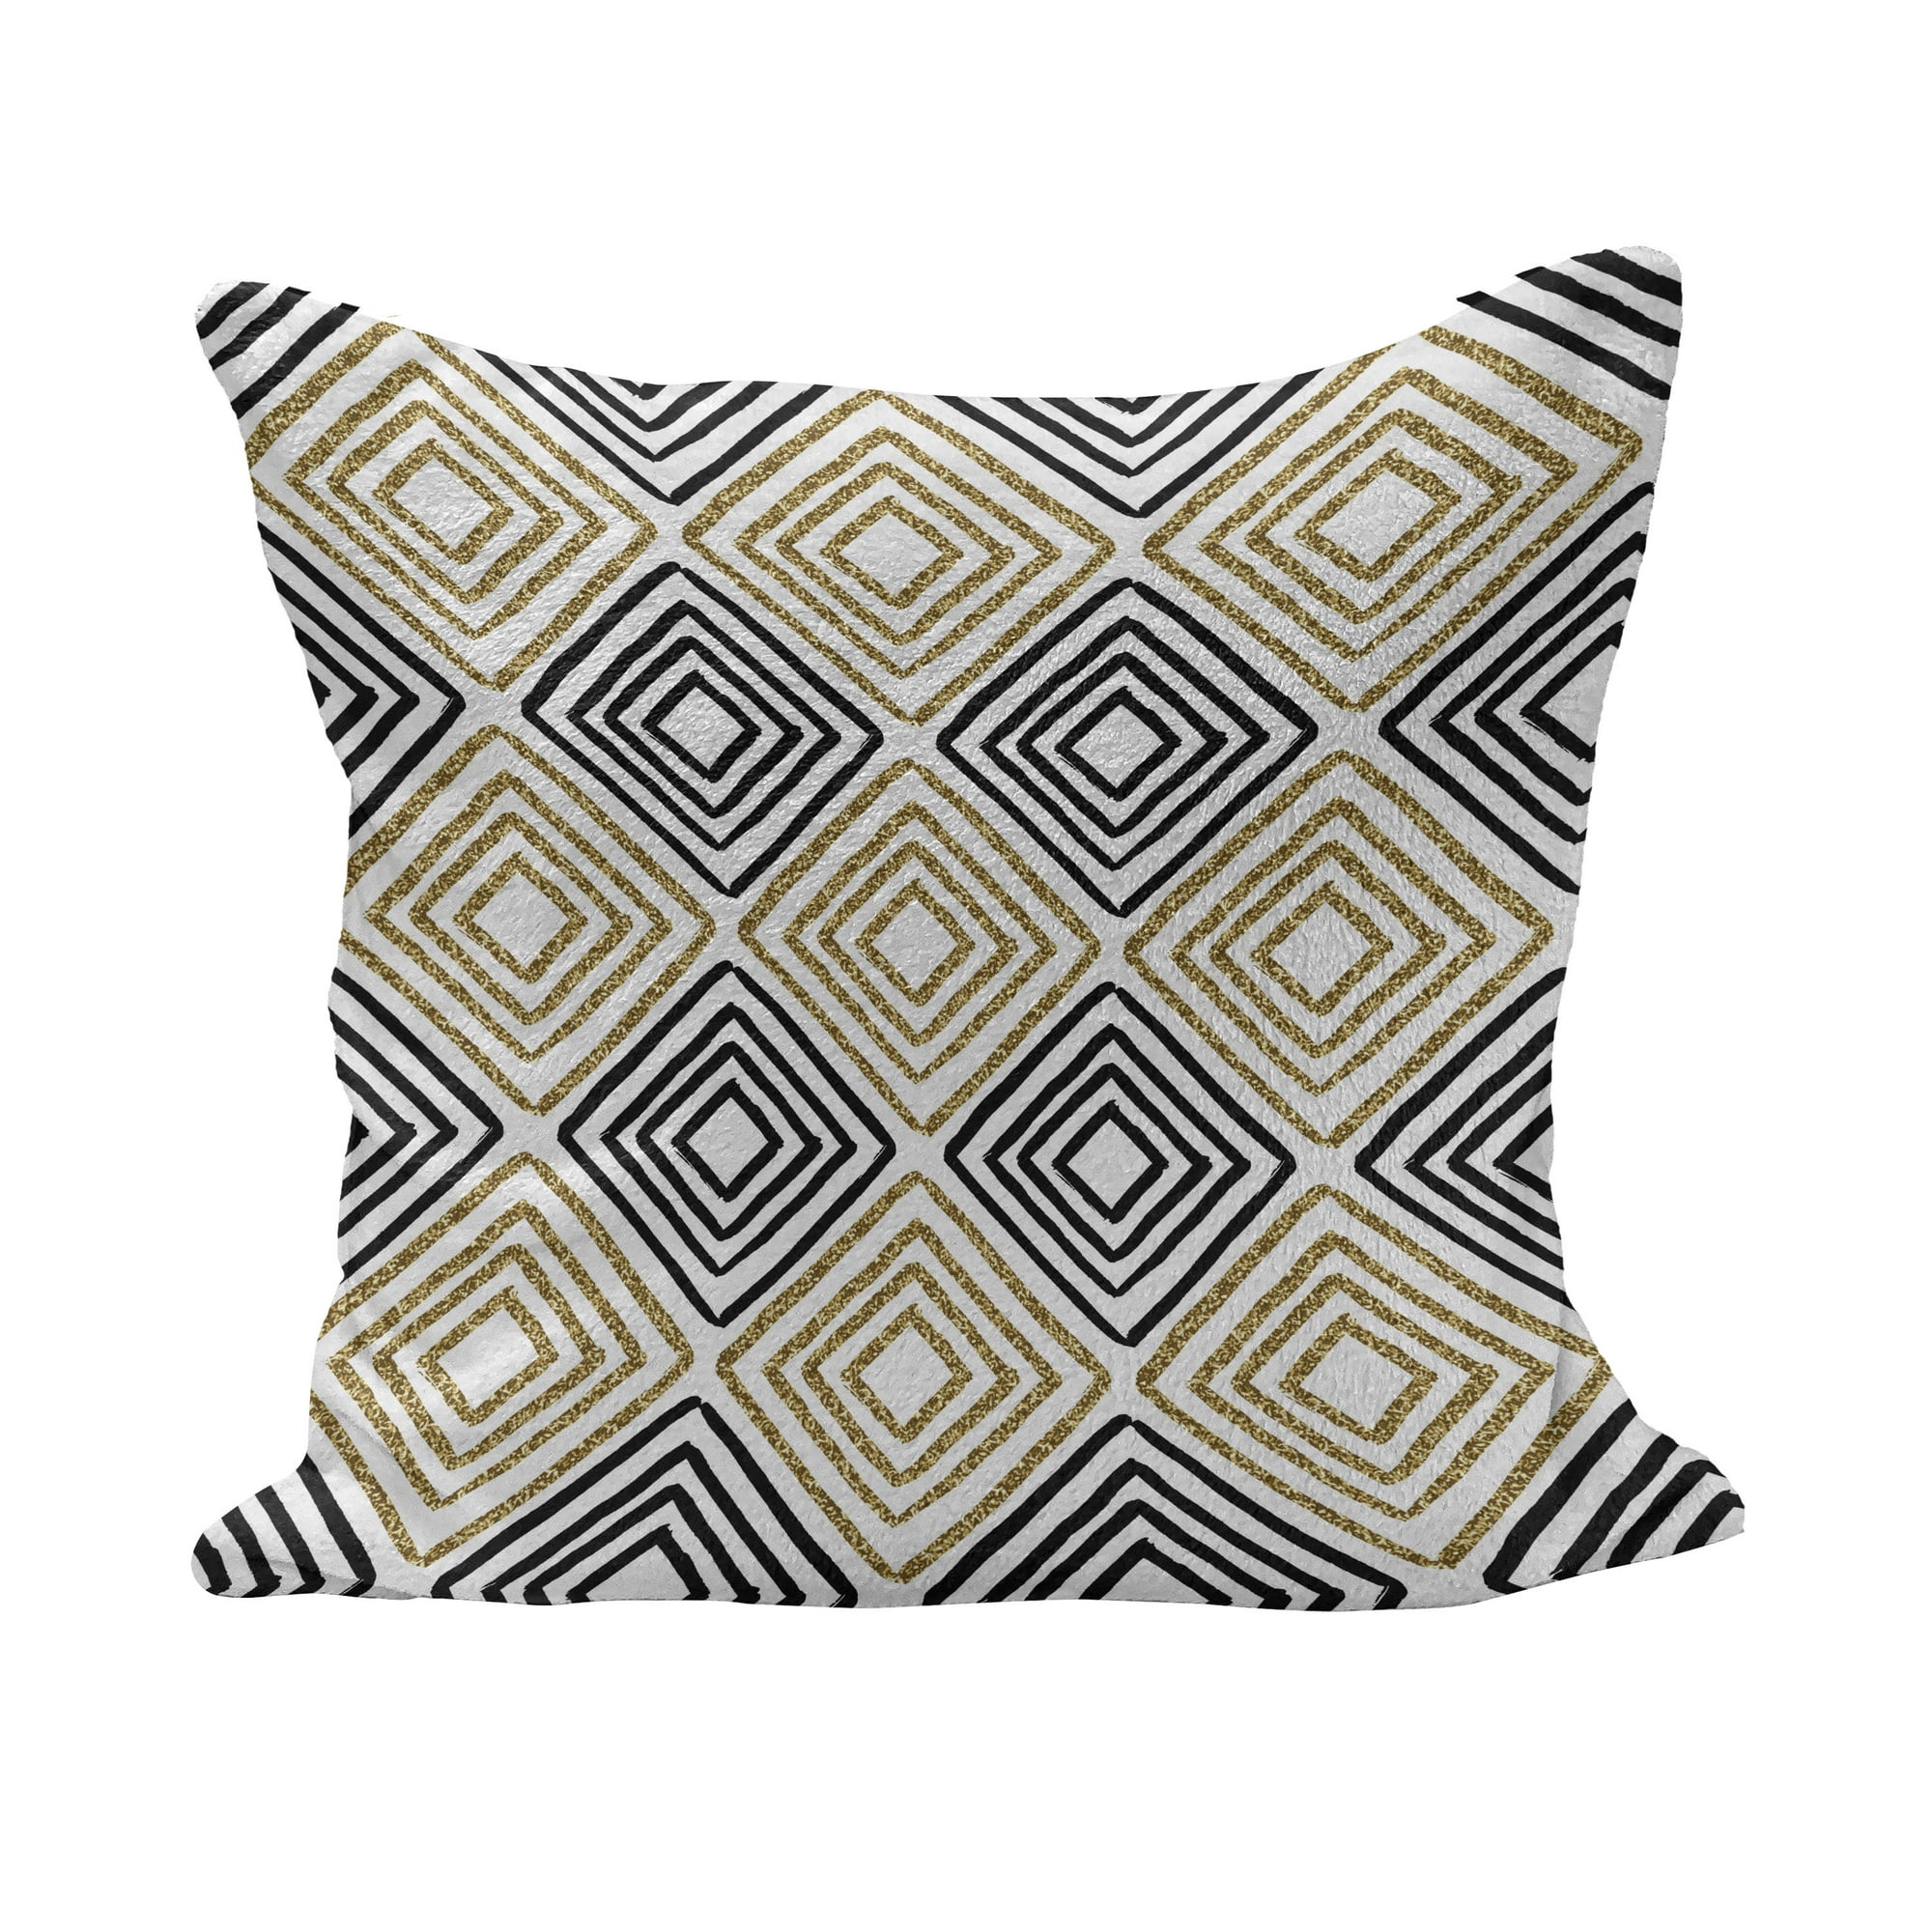 Large Black Yellow Modern Pillows, Modern Throw Pillows for Couch